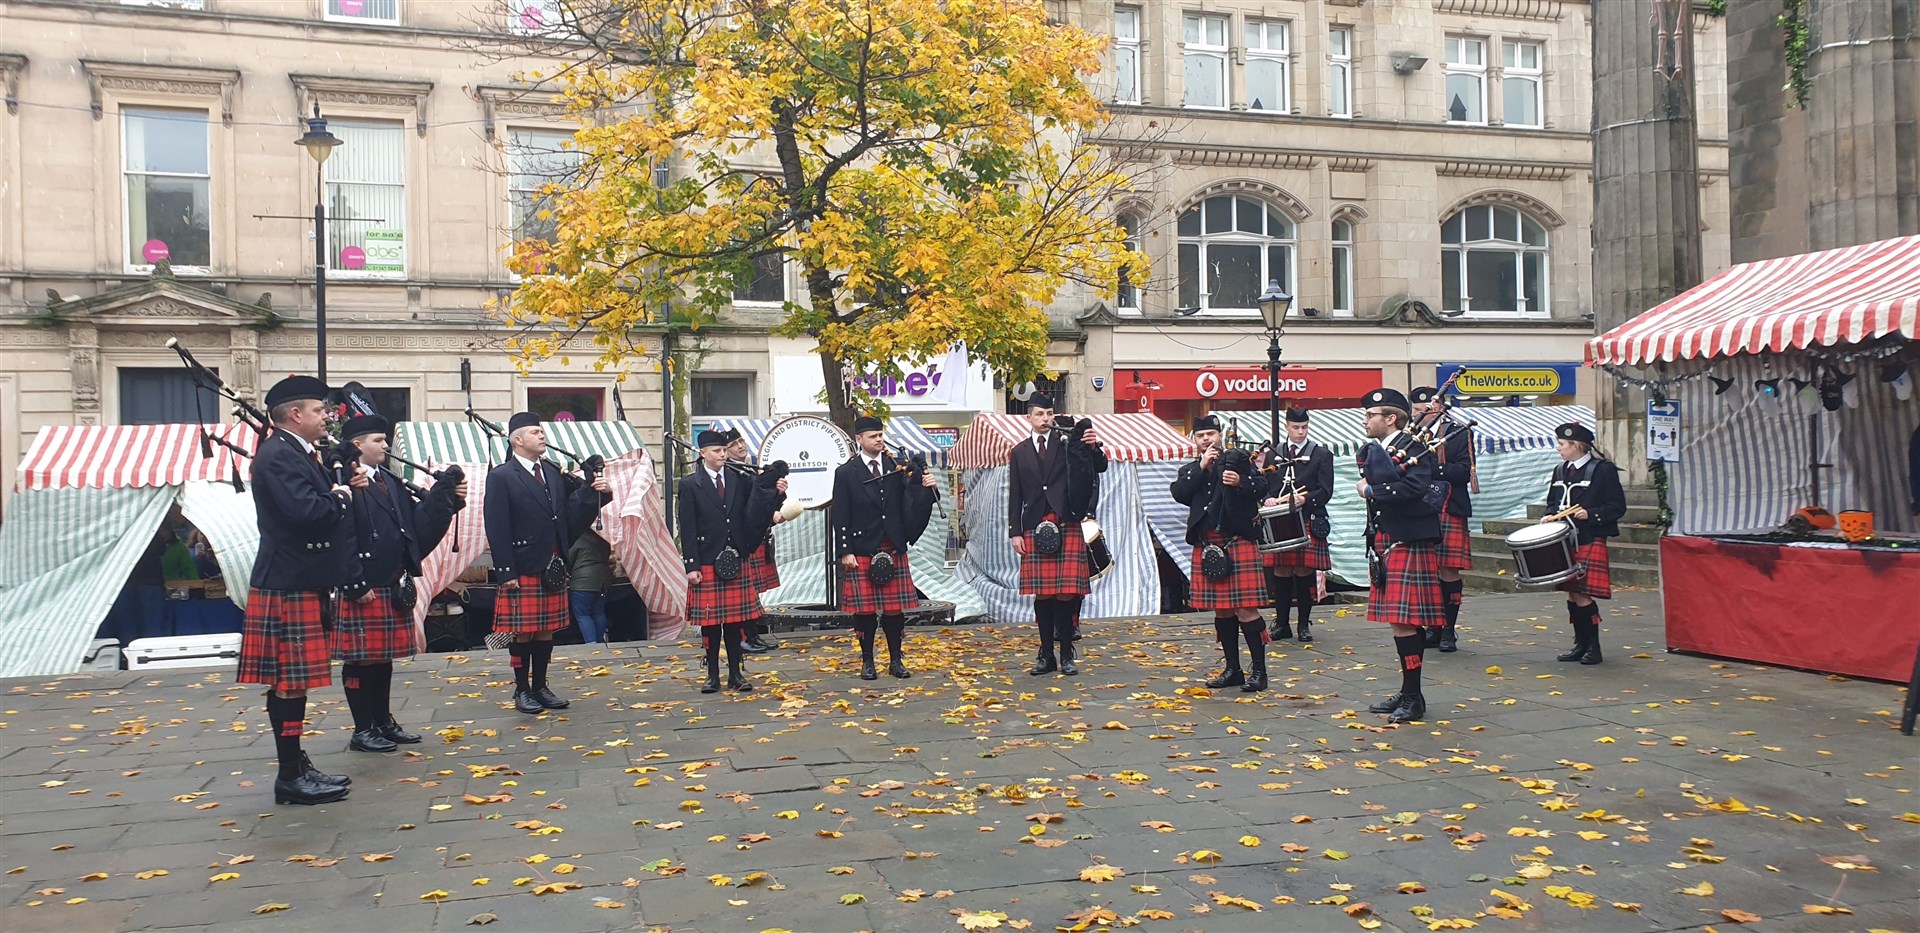 Elgin and District Pipe Band playing on the Plainstones.